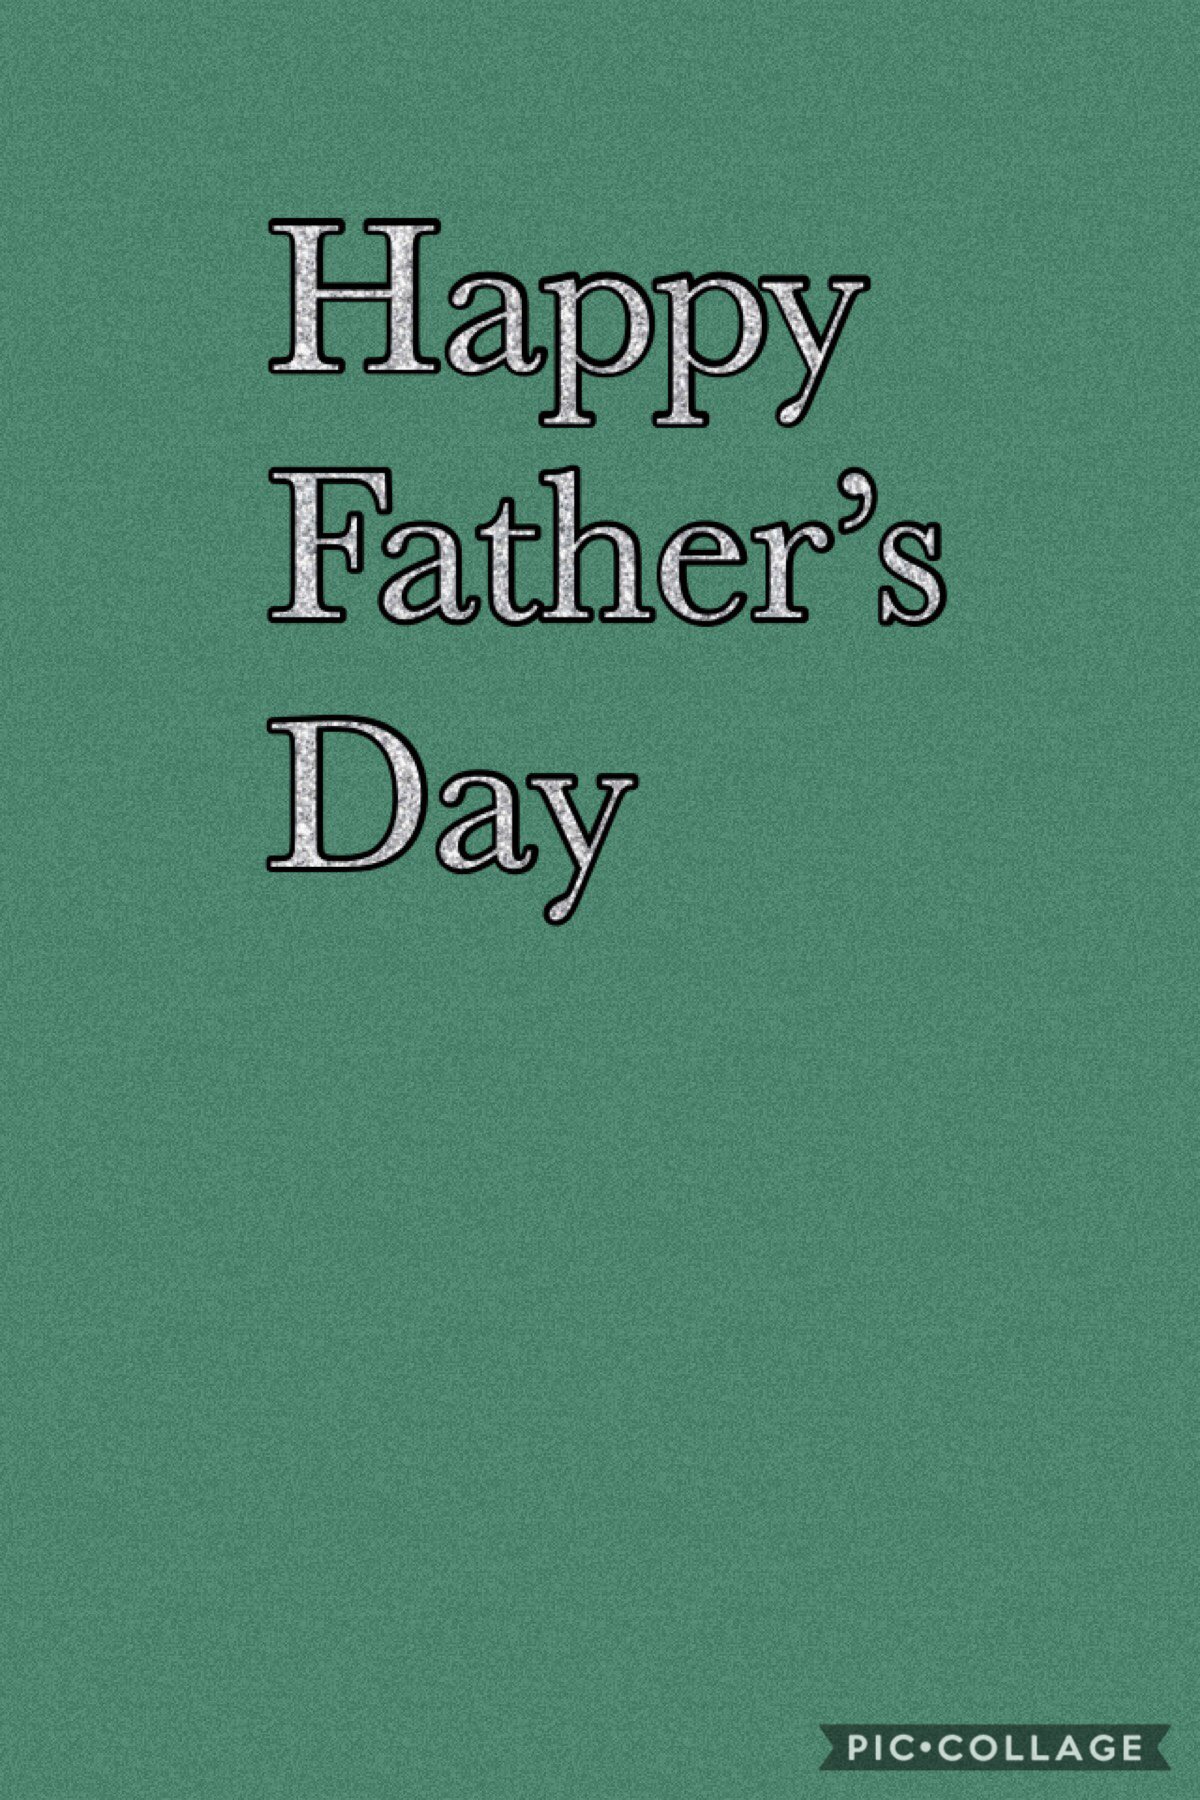 Happy father’s day!!